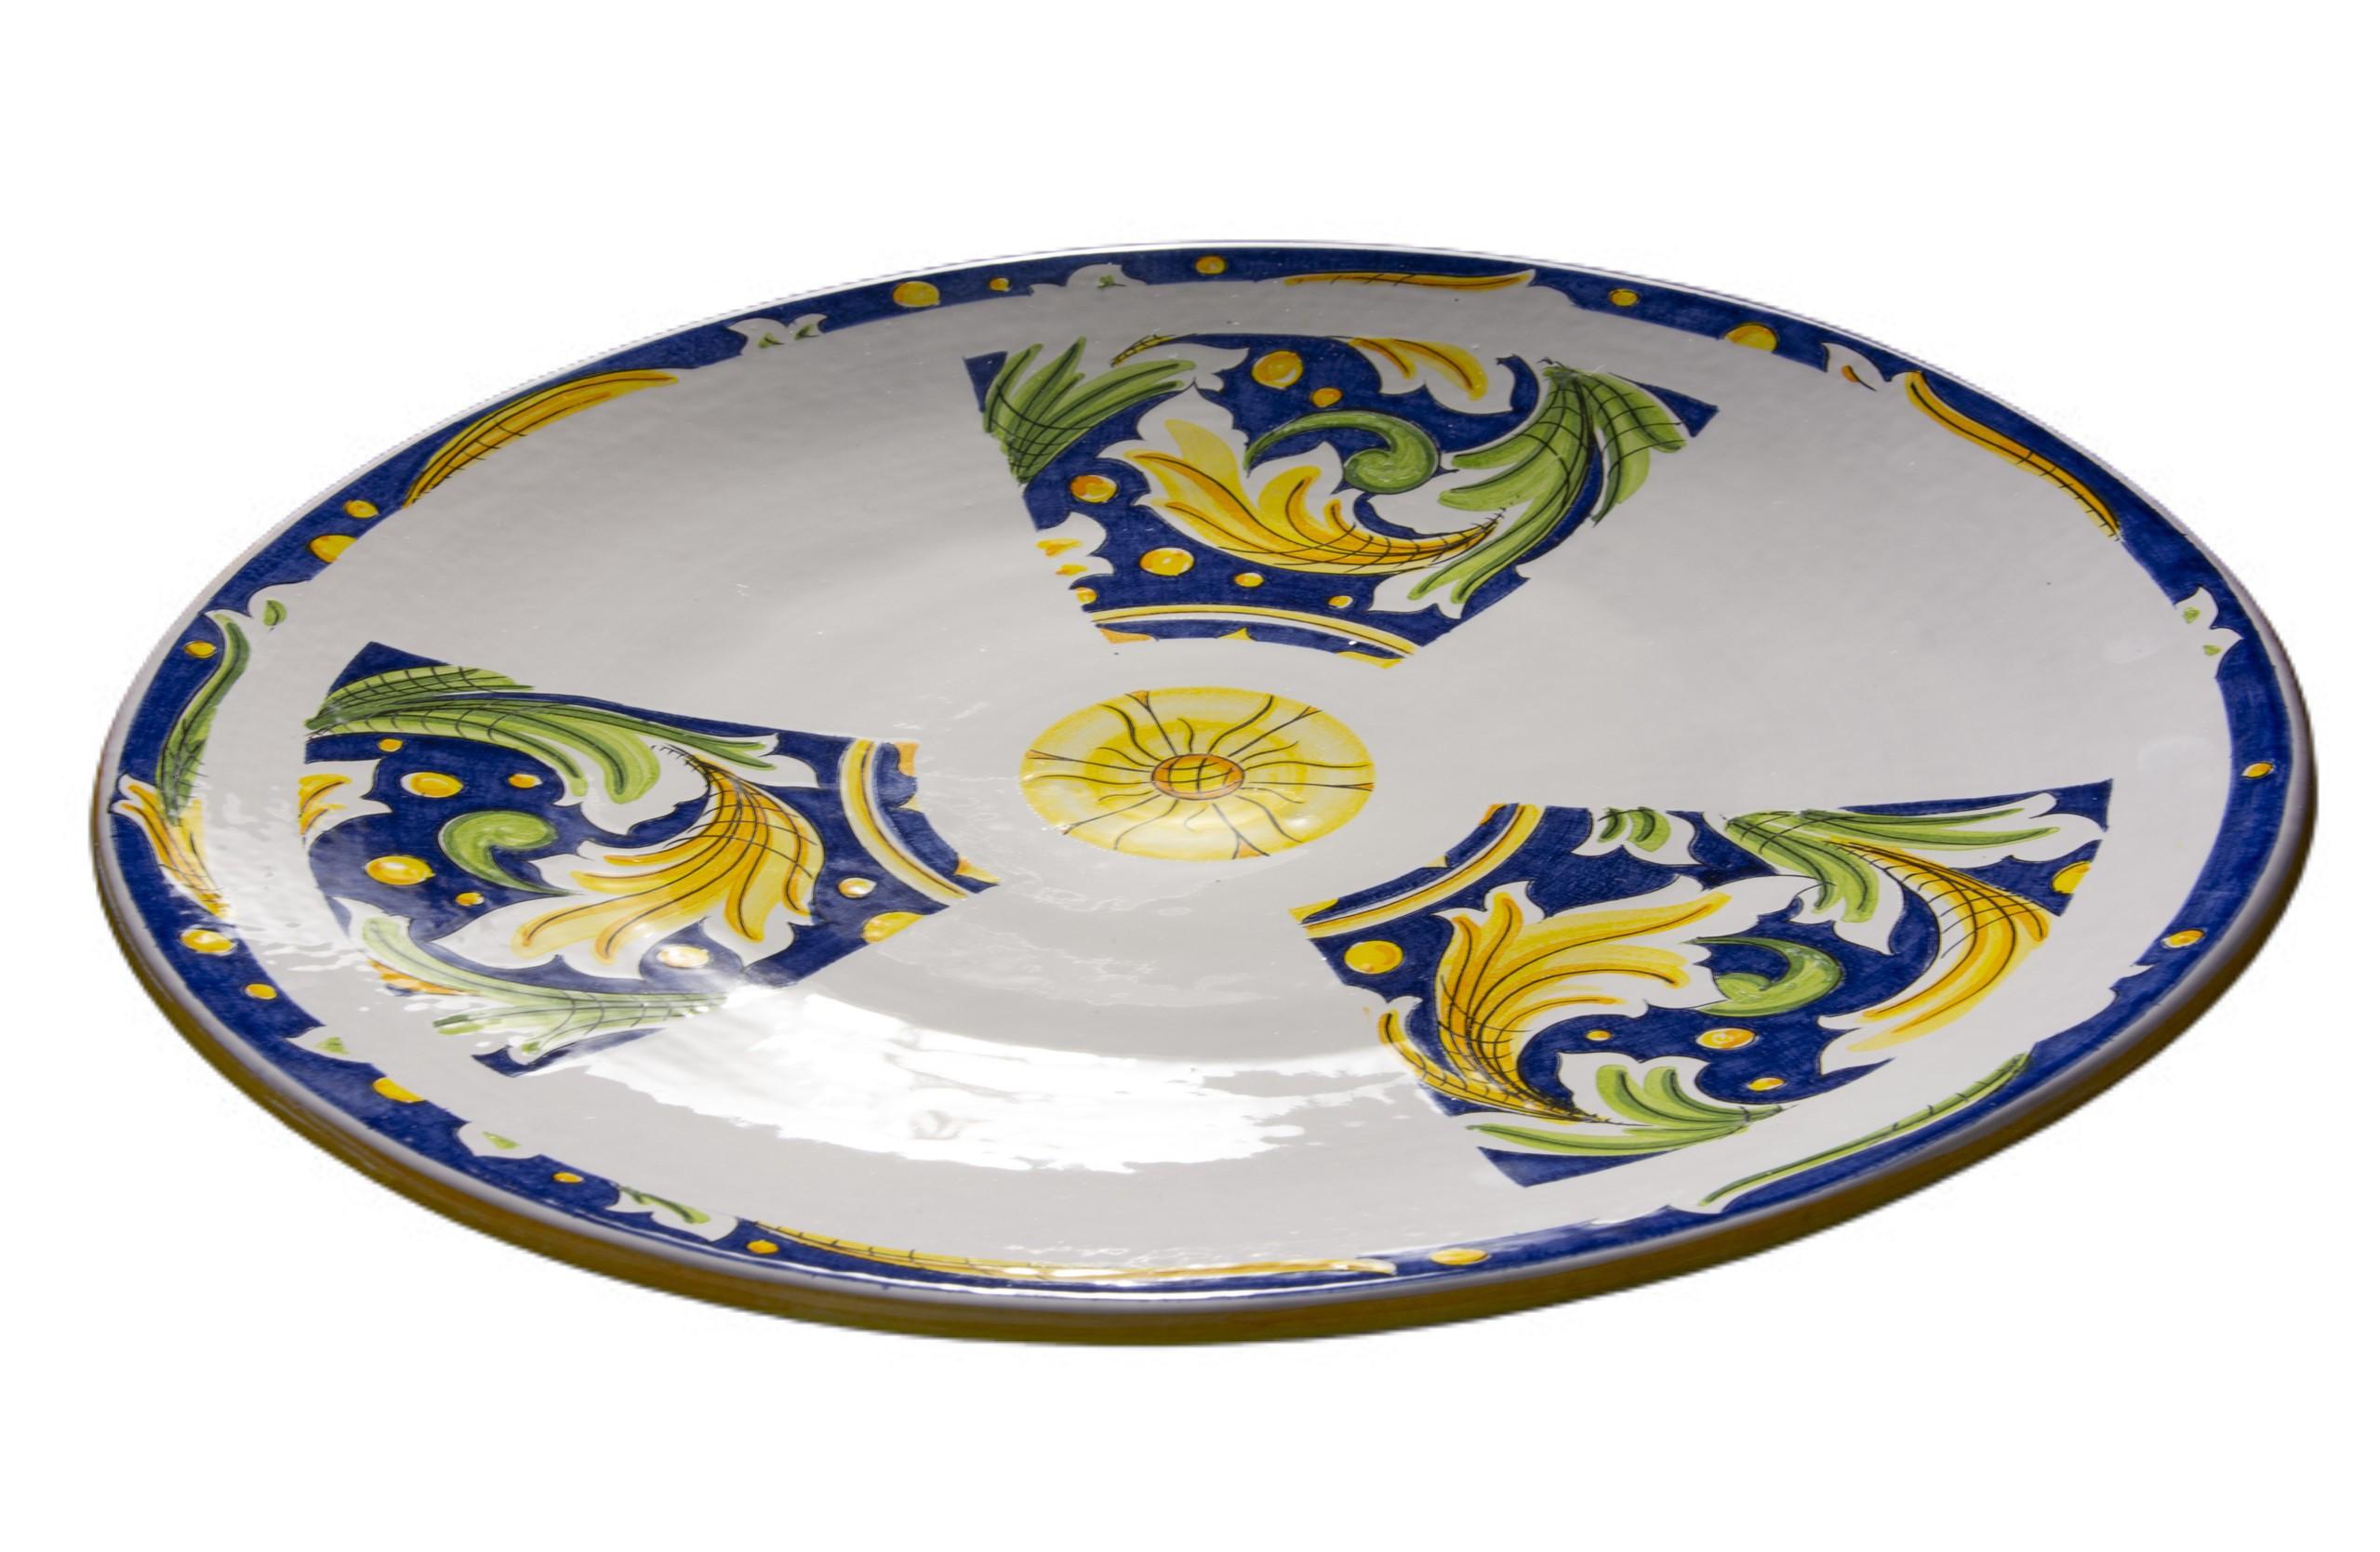 Hand-Painted Large Ceramic Plate Hand Painted Glazed Majolica Italy Contemporary 21st Century For Sale